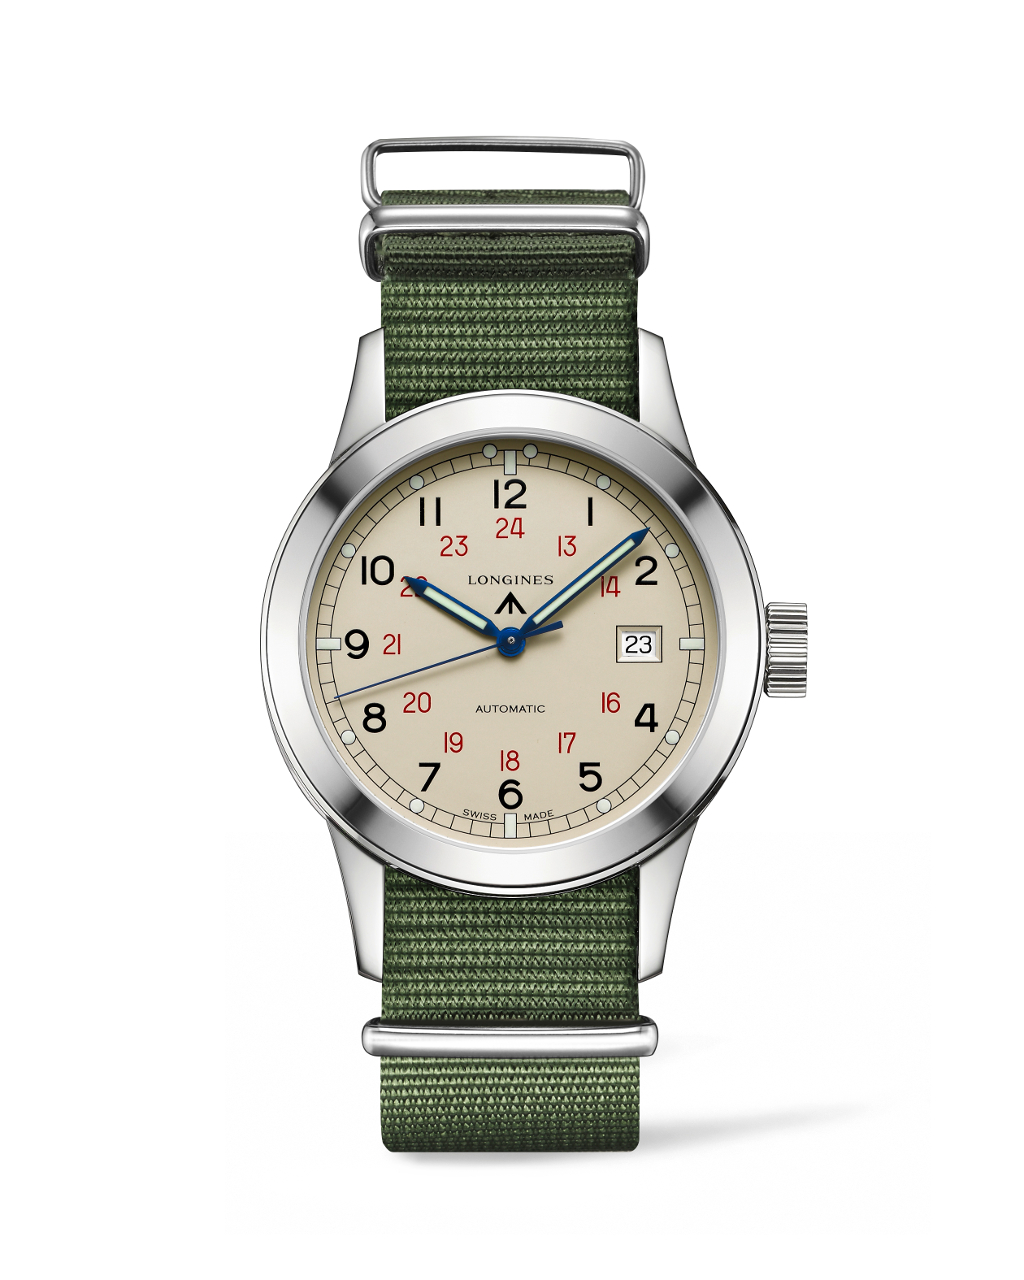 The Longines Heritage Military COSD.